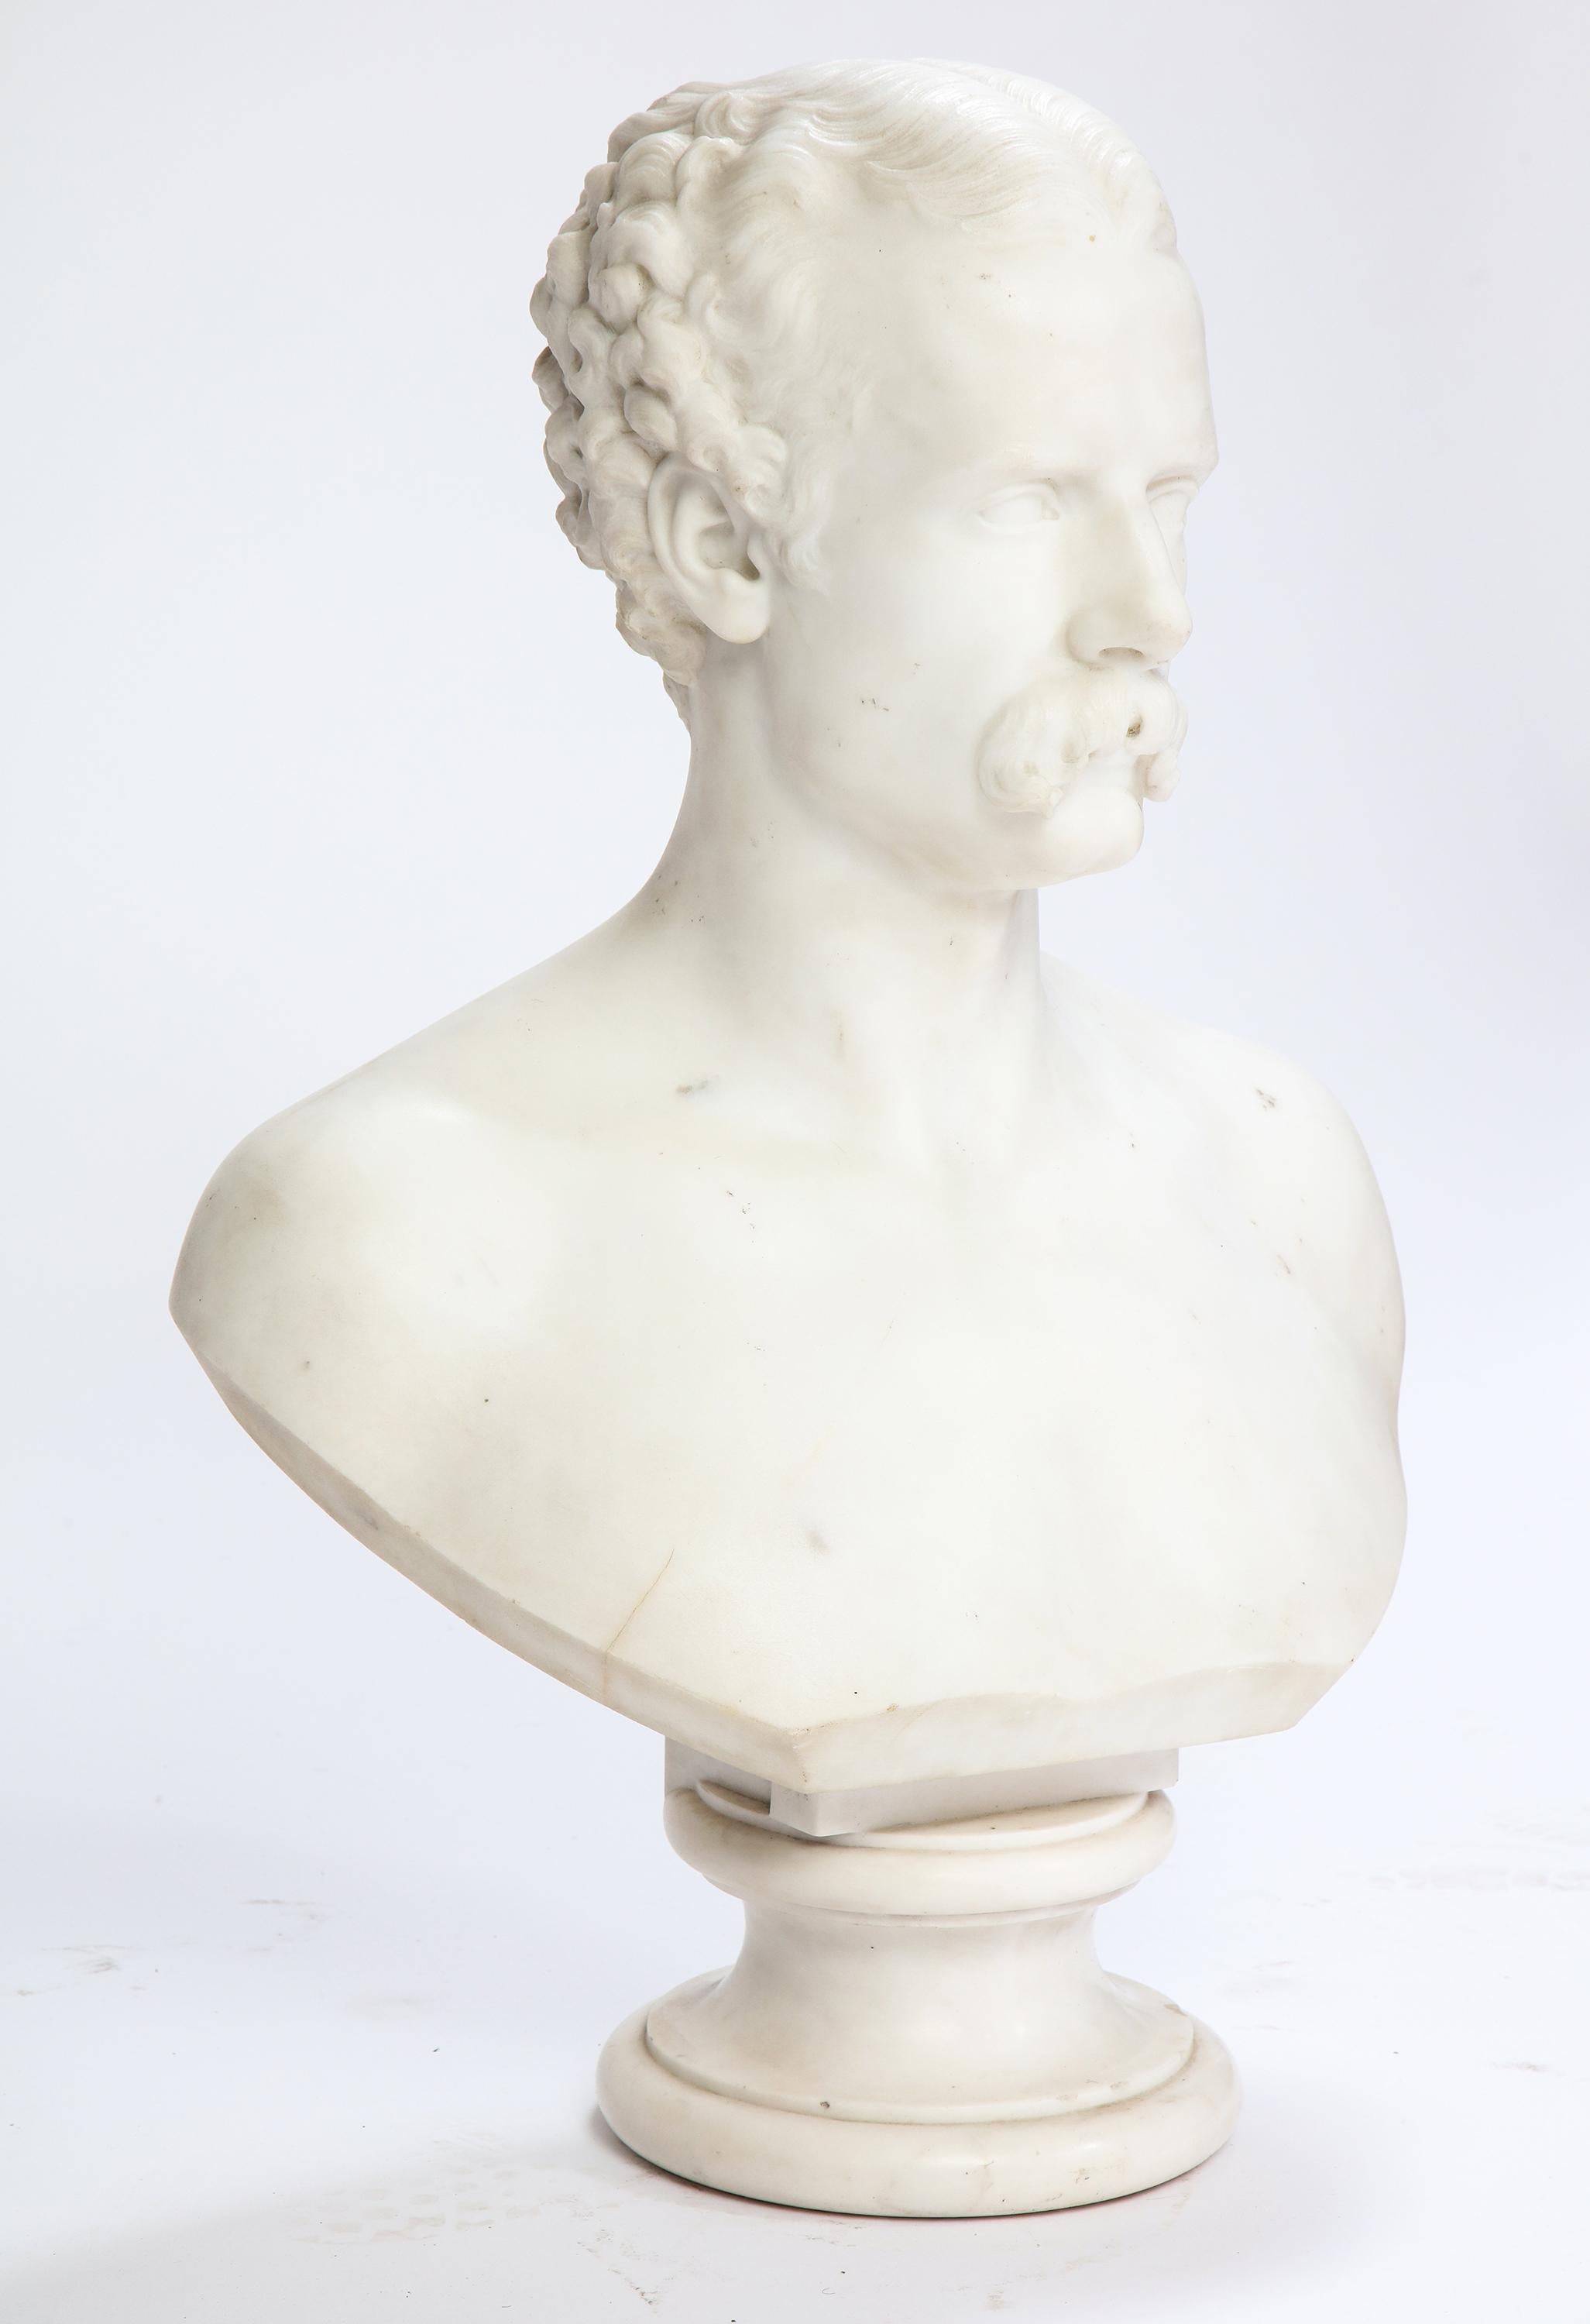 European White Marble Bust of a Man with a Mustache, Possibly Italian, 19th/20th Century